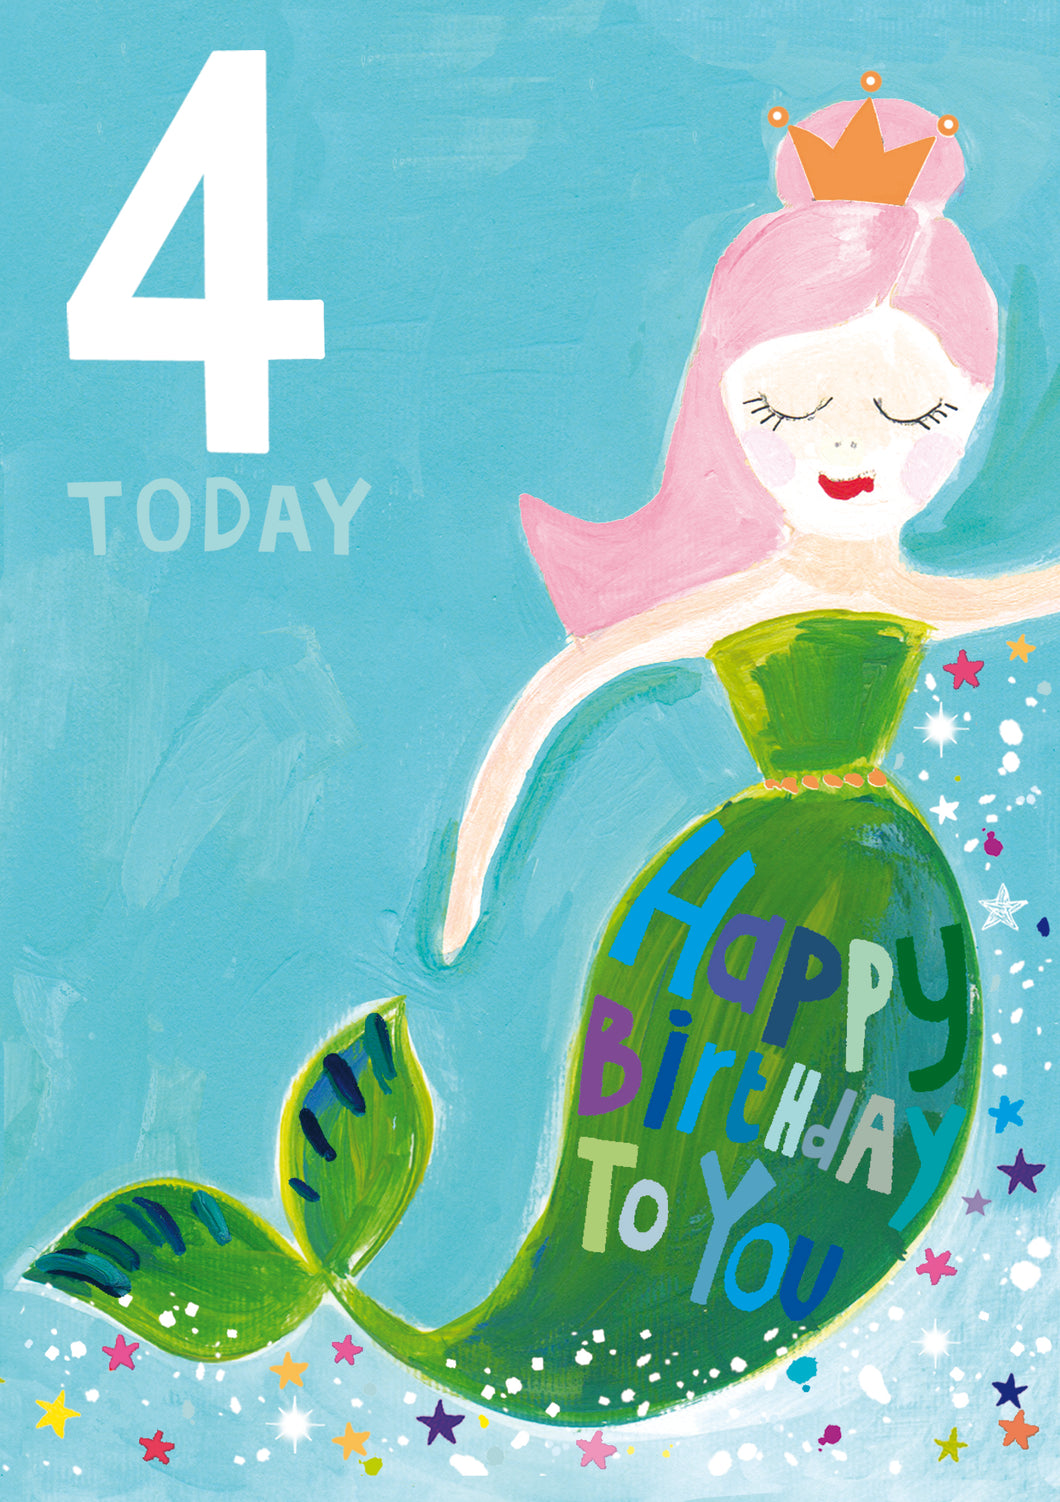 Mermaid 4 today - The Alresford Gift Shop